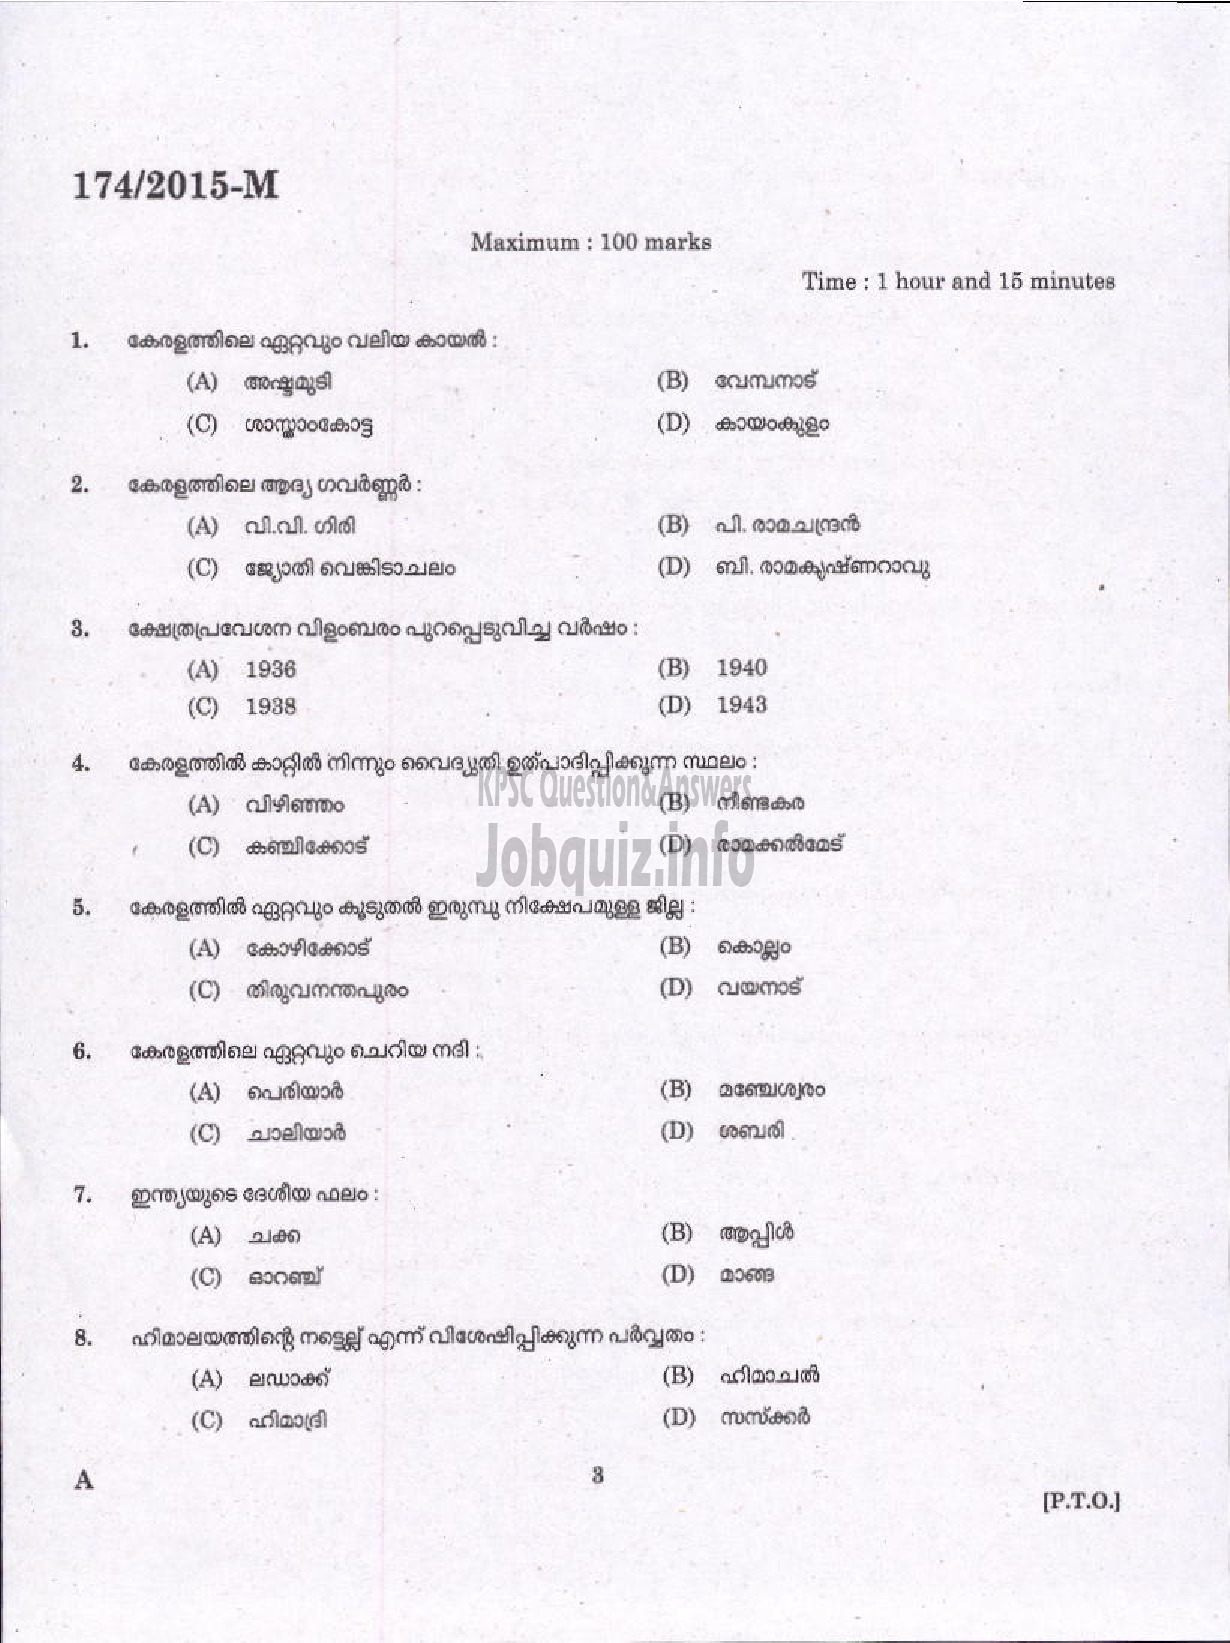 Kerala PSC Question Paper - DRIVER GRADE GR II HDV VARIOUS/EXCISE ( Malayalam ) -1